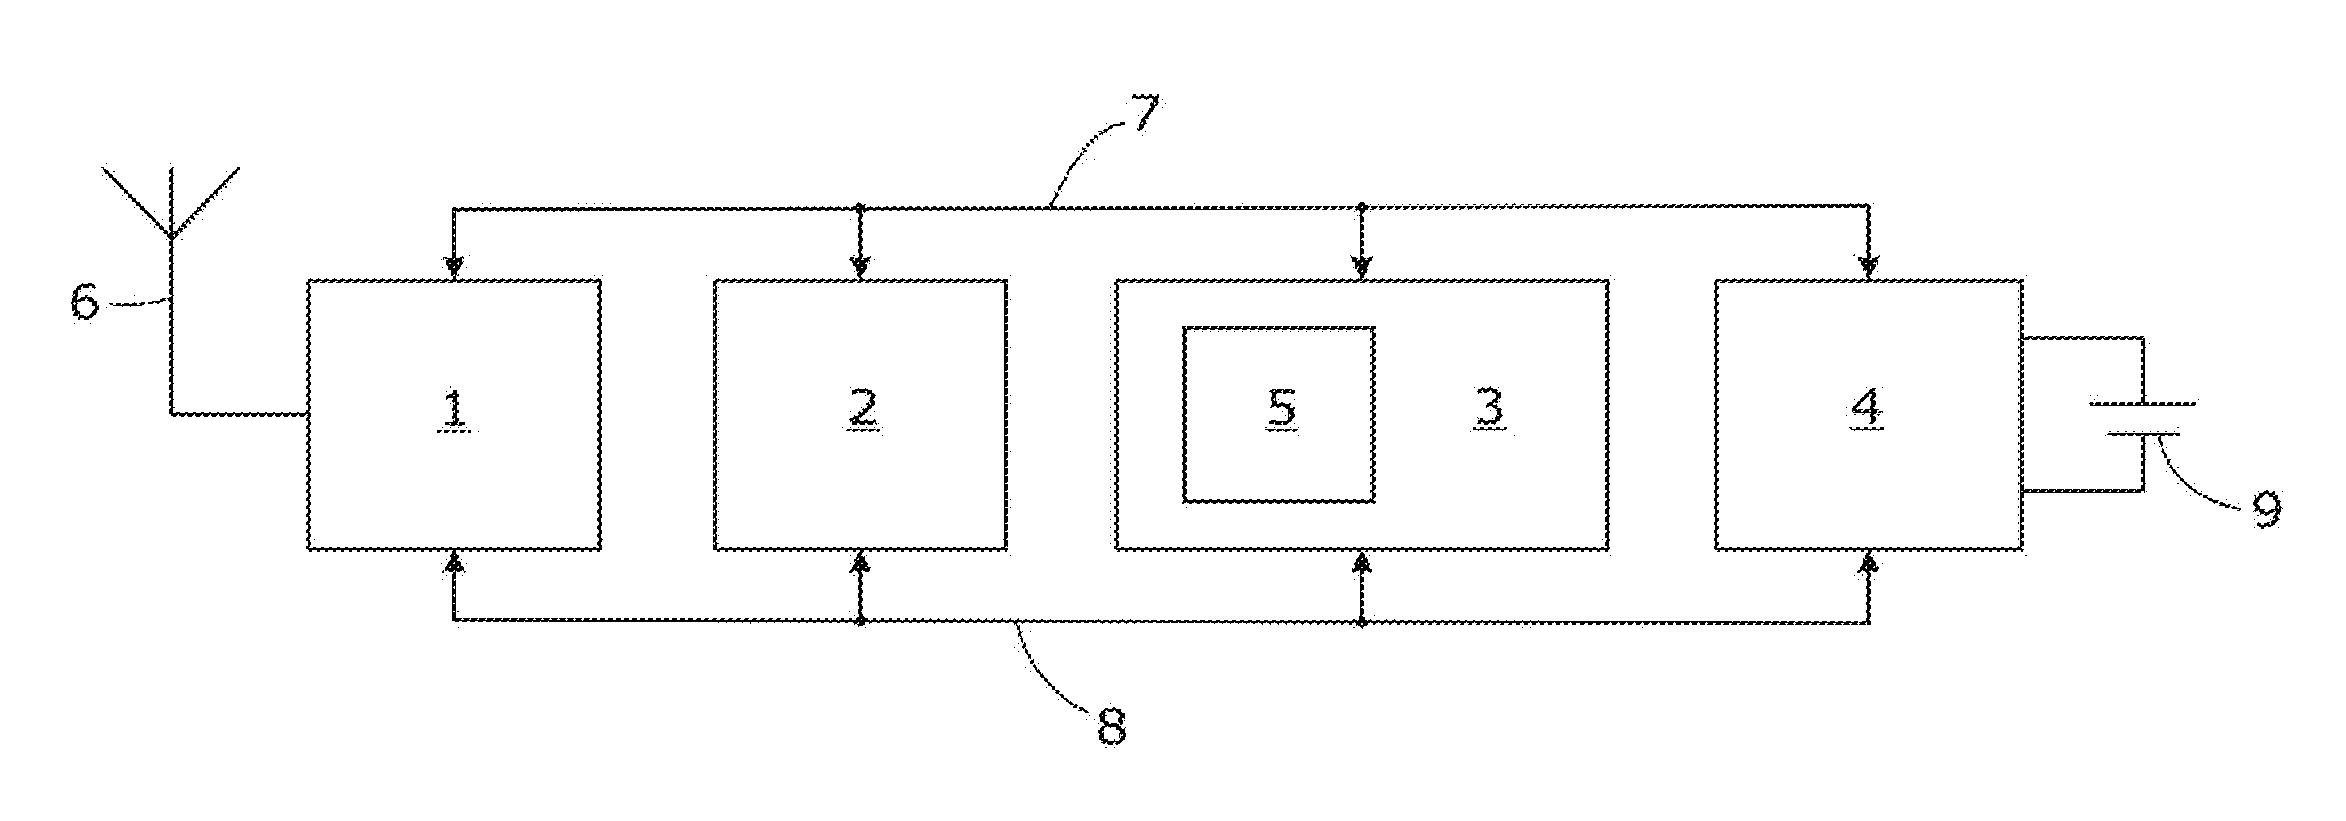 Method for routing data in a wireless sensor network